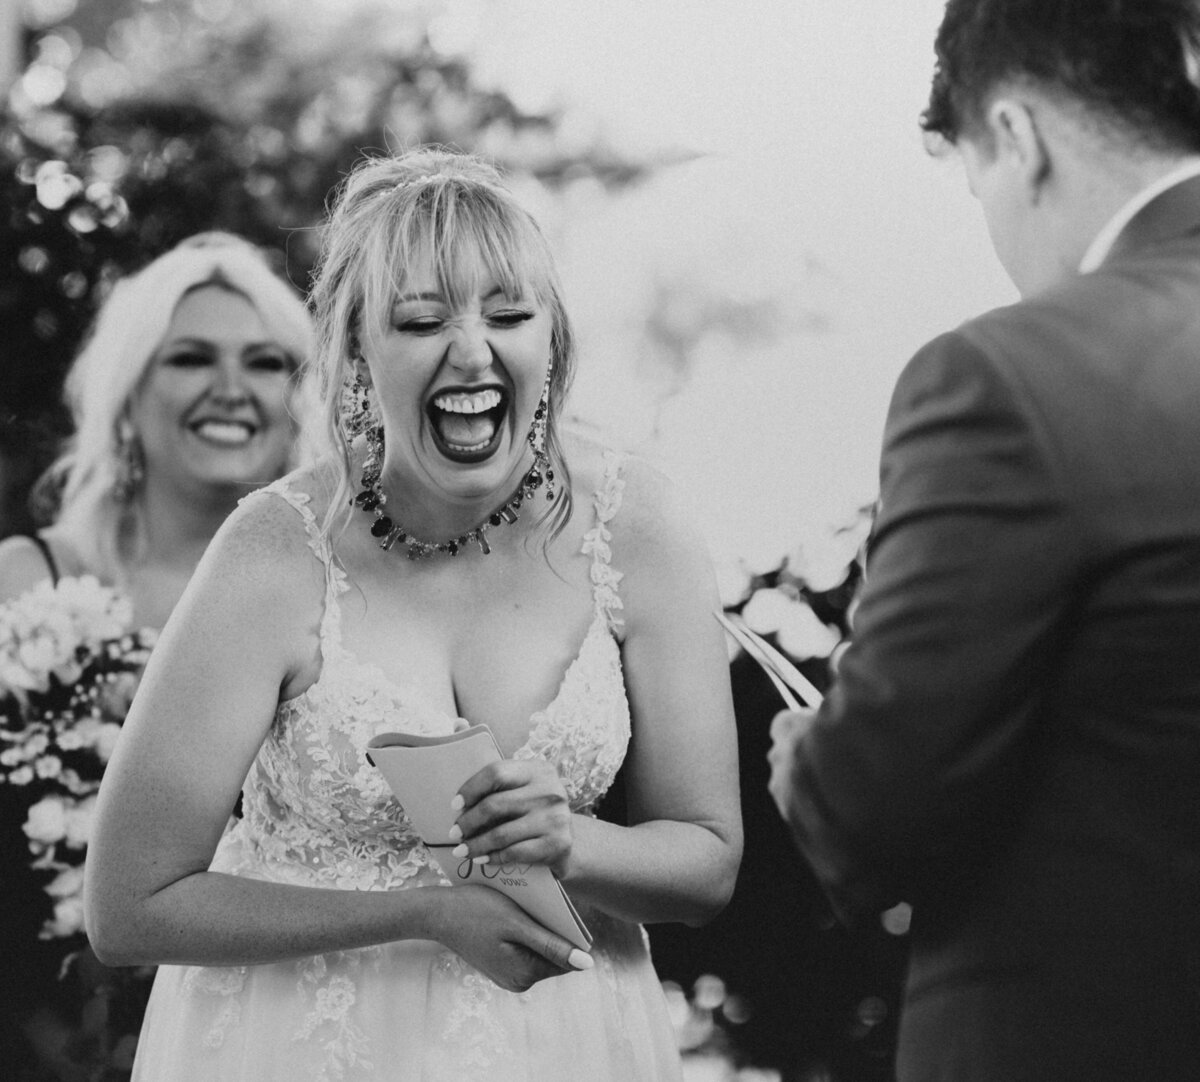 Bride laughing heartily during the wedding ceremony with the officiant and bridesmaid smiling in the background